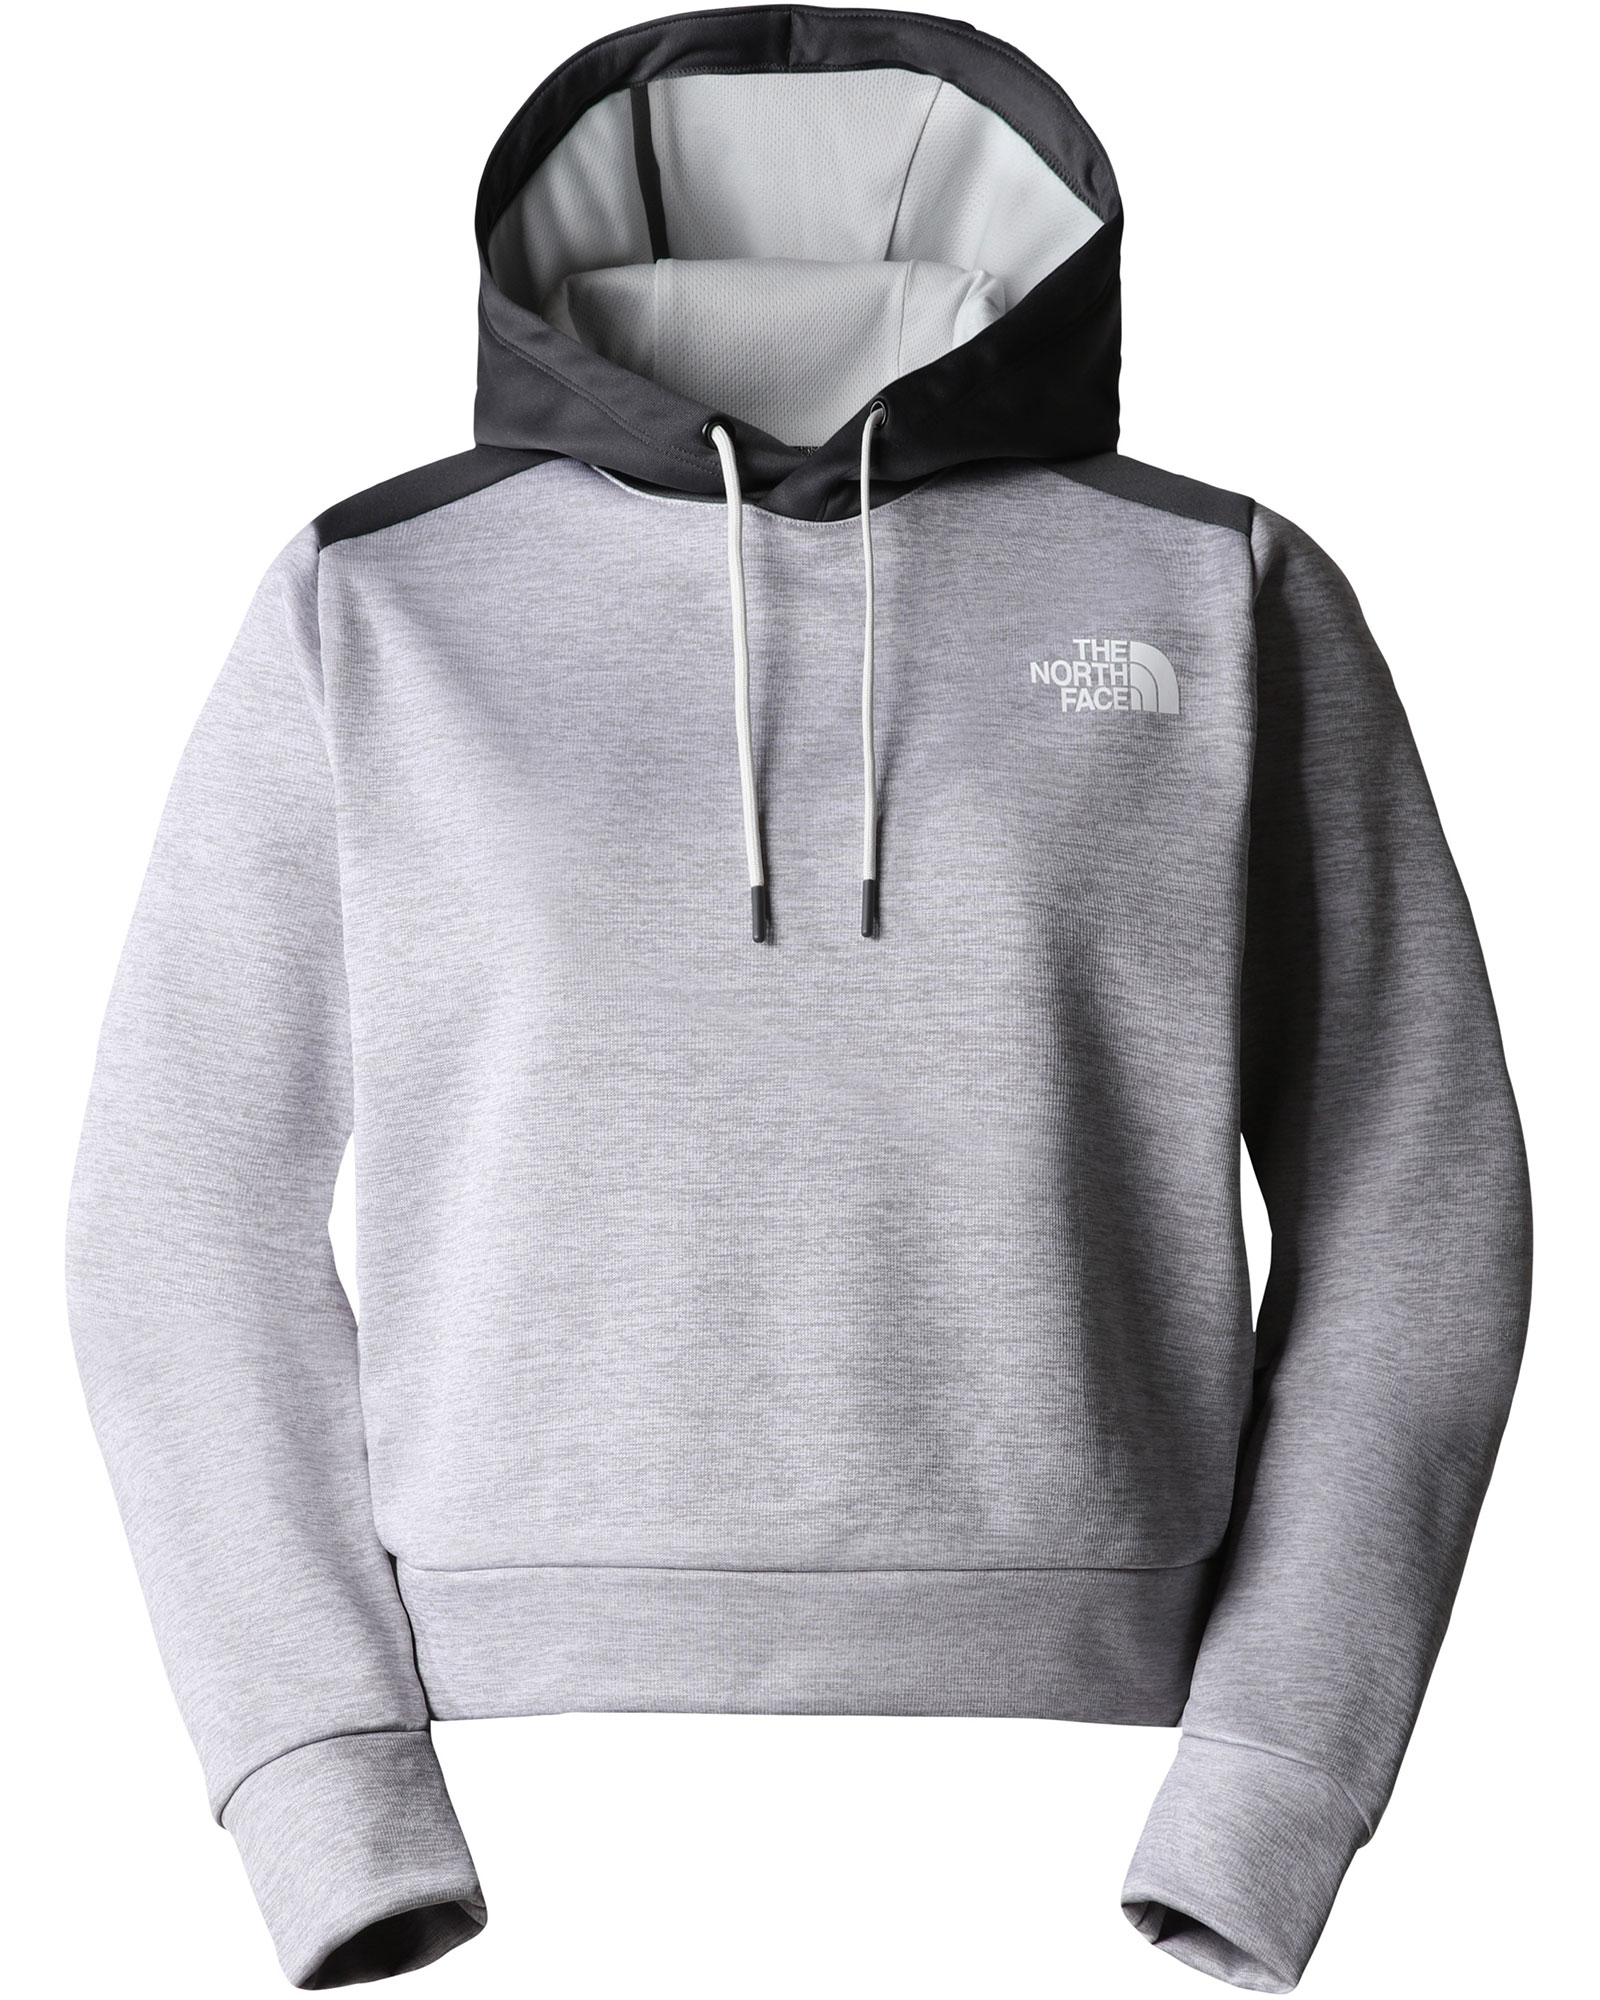 The North Face Reaxion Women’s Fleece Pullover Hoodie - TNF Light Grey Heather XL